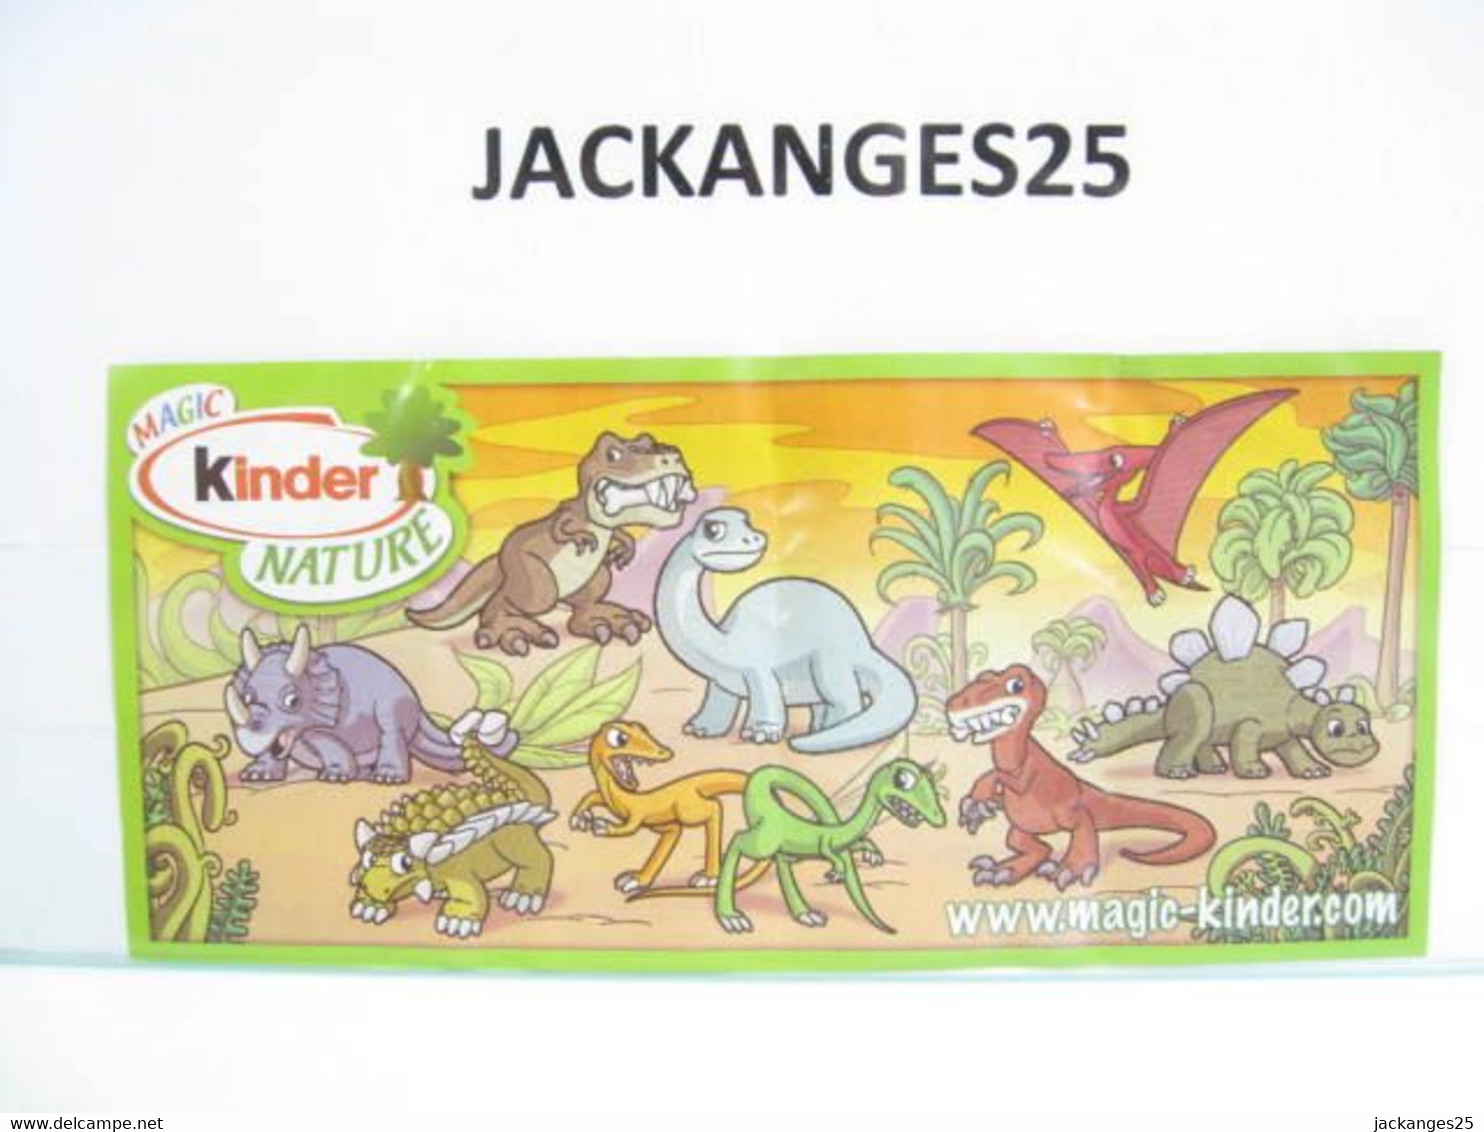 KINDER MPG UN 01 A DINOSAURE BRONTOSAURUS ANIMAUX NATURE NATOONS TIERE 2010 + BPZ A NATURE - Familles